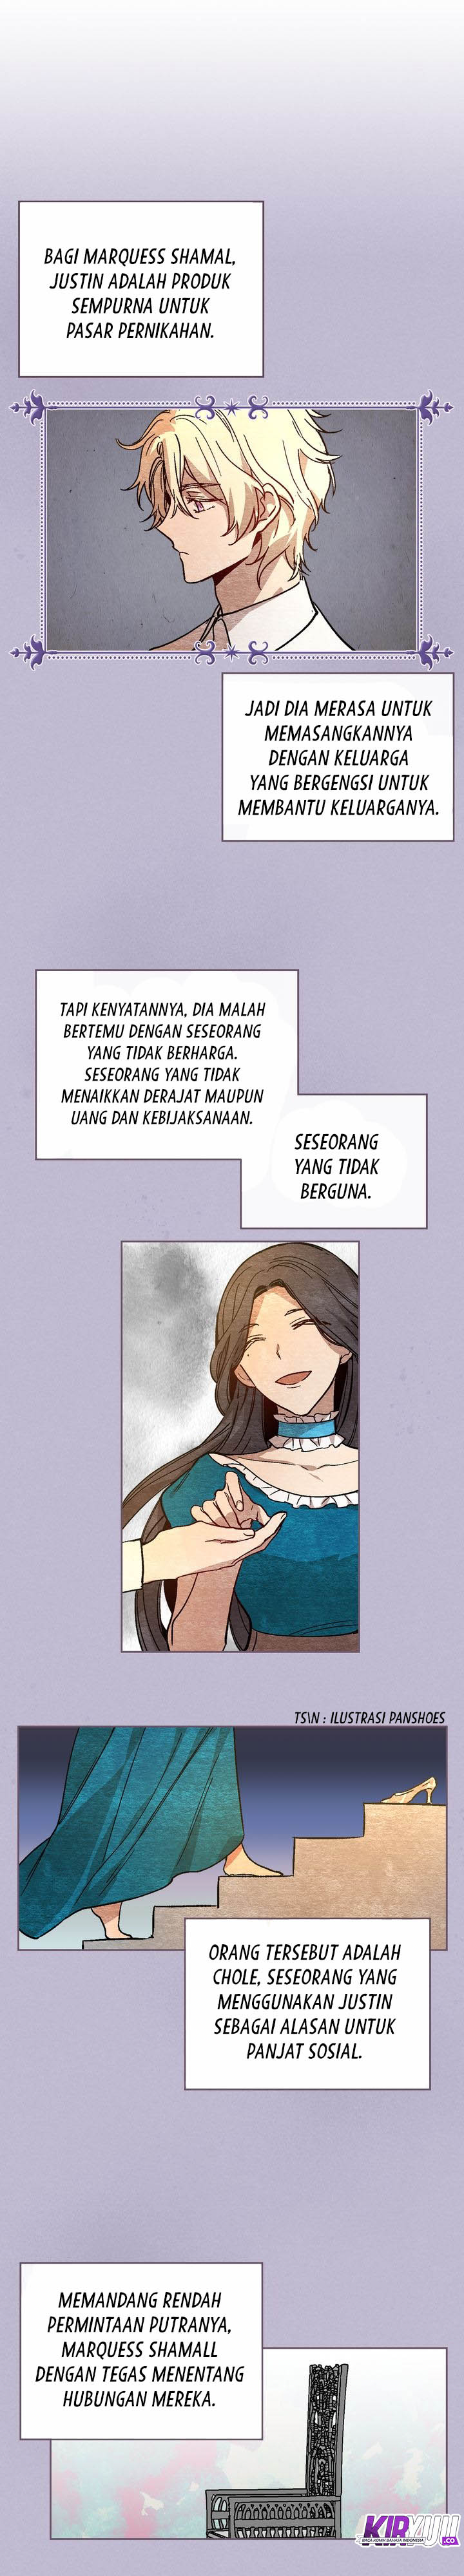 The Reason Why Raeliana Ended up at the Duke’s Mansion Chapter 59